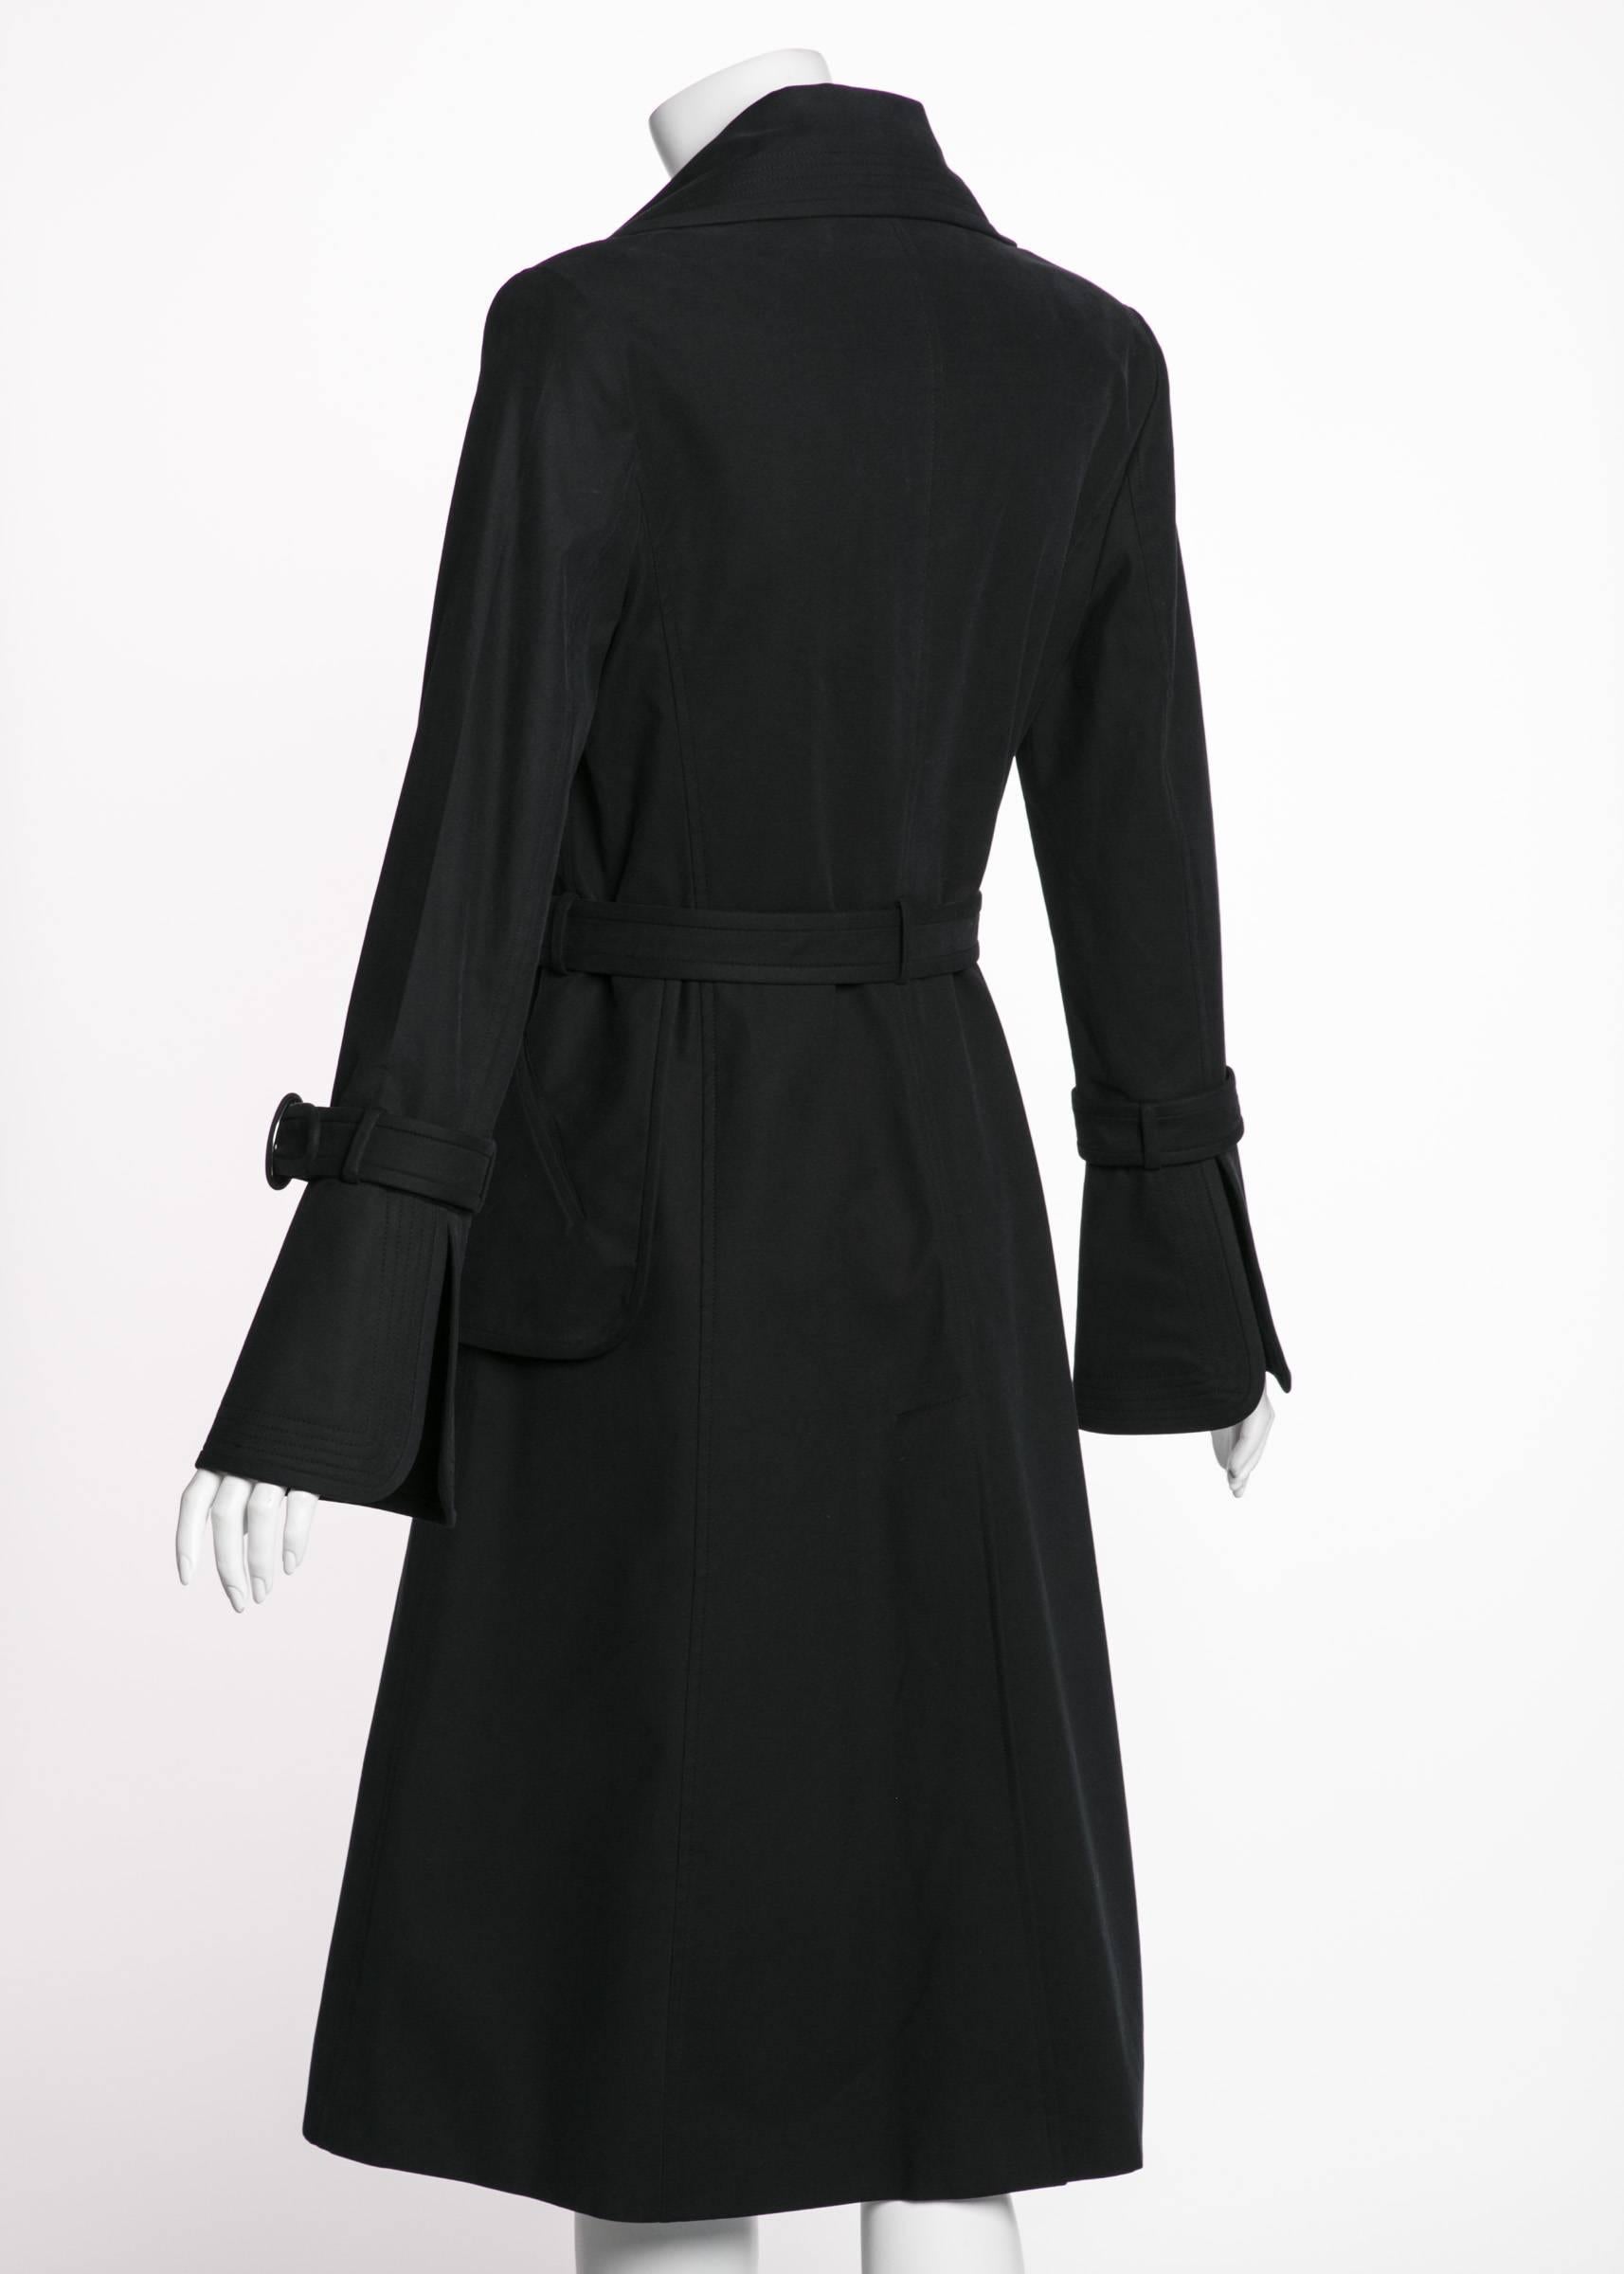 Women's Martin Grant Classic Black  Belted Trench Coat